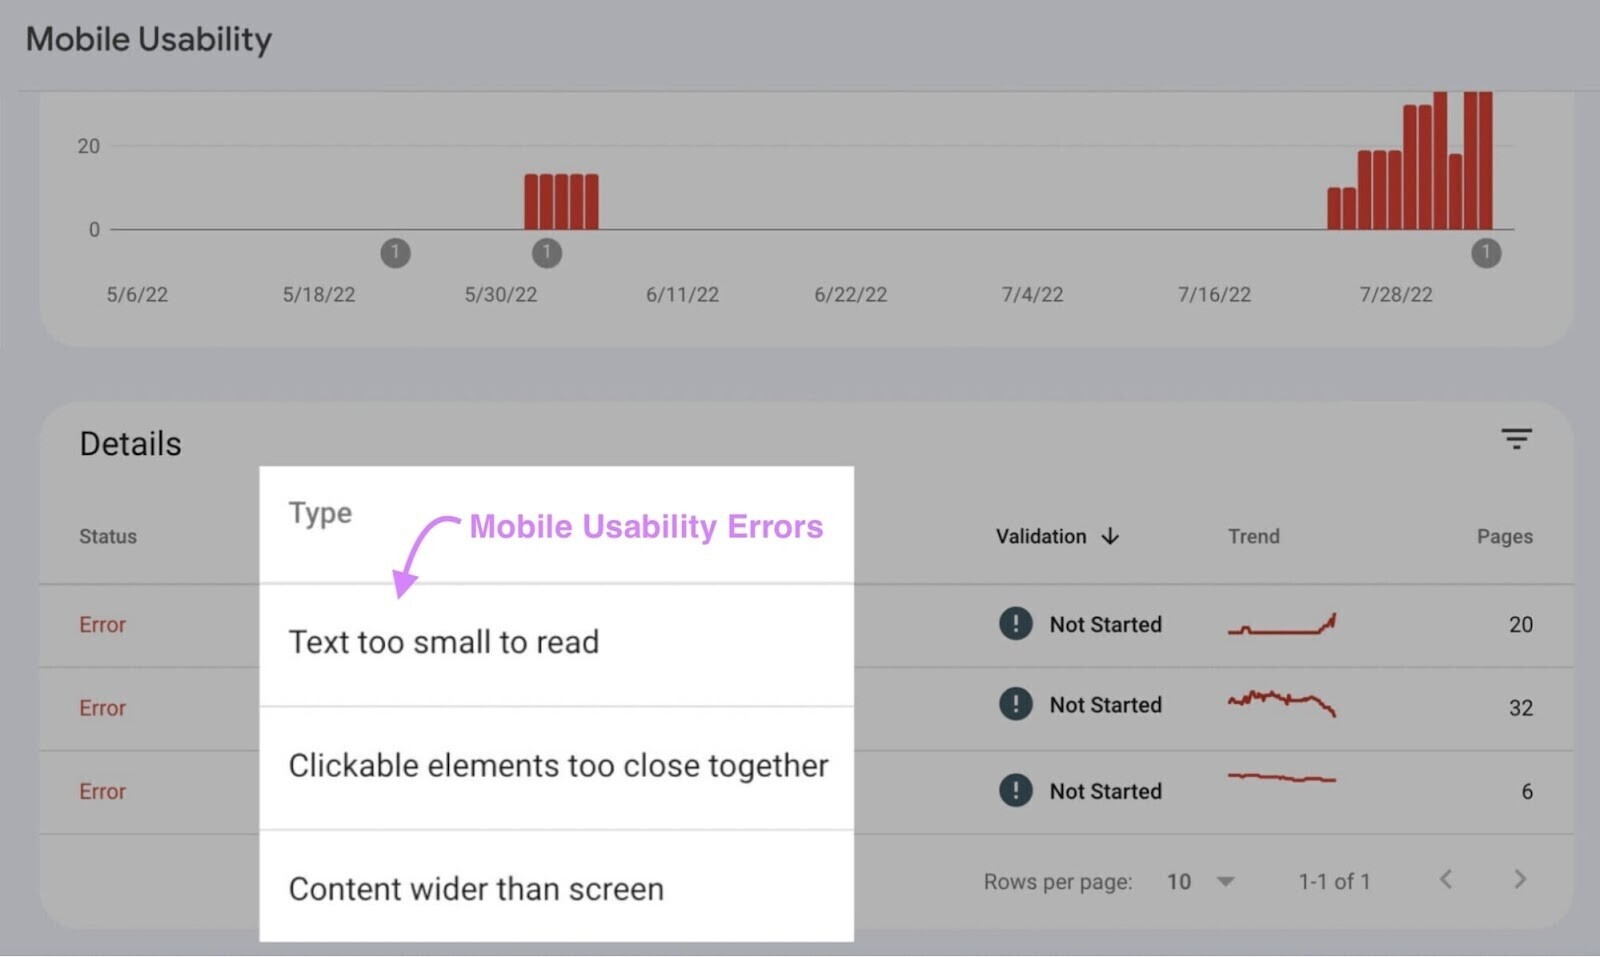 “Mobile Usability” report in Google Search Console